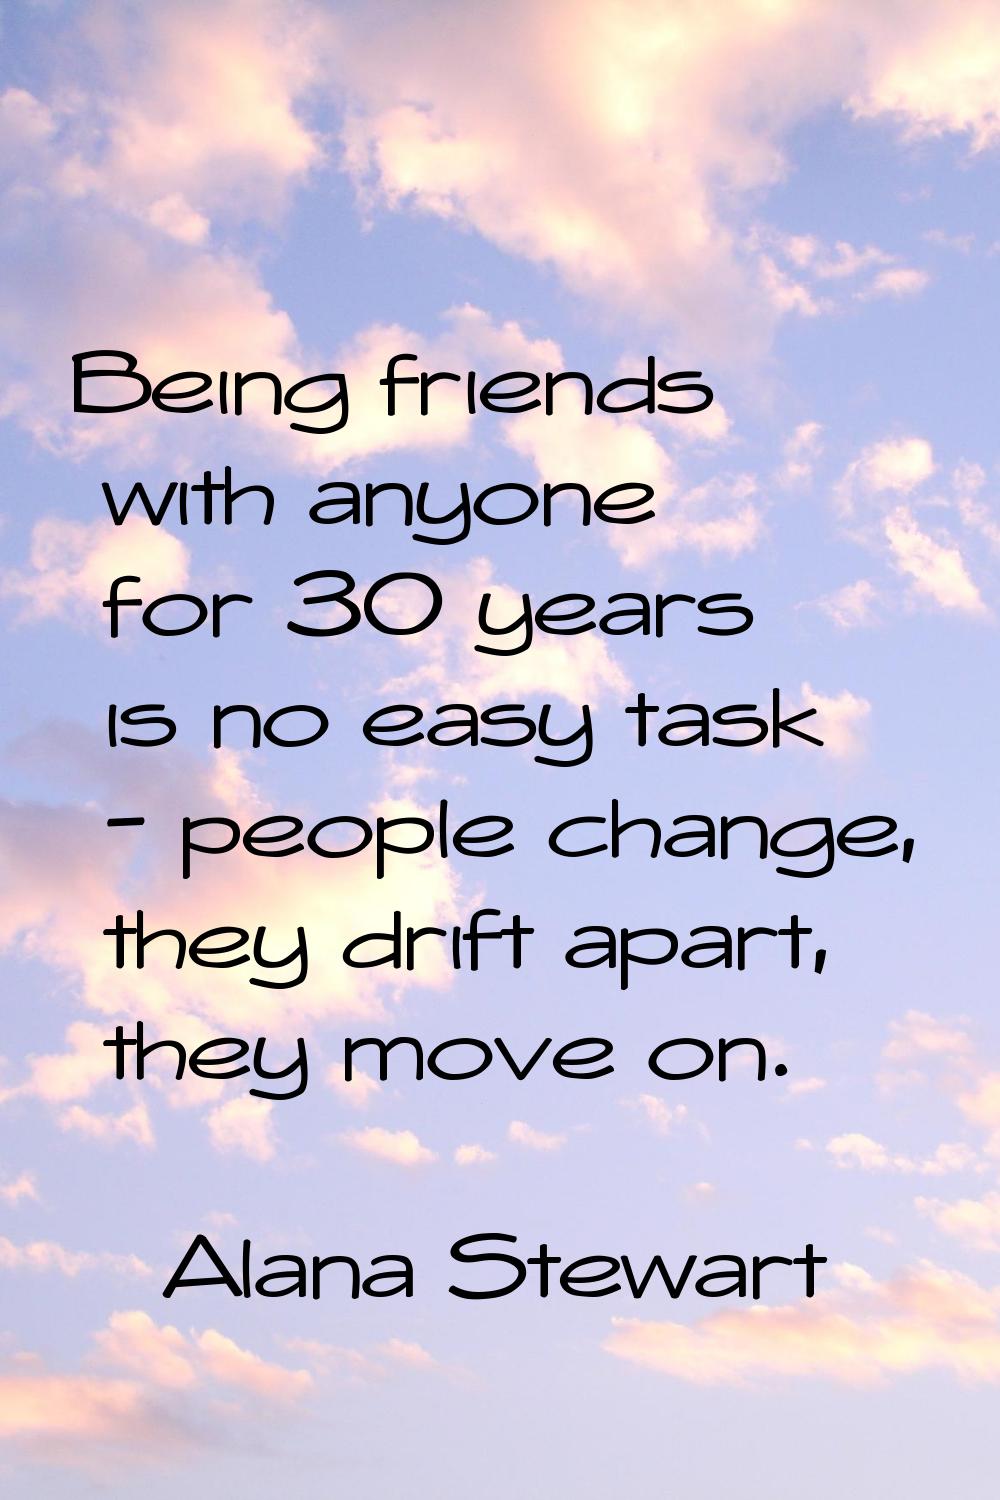 Being friends with anyone for 30 years is no easy task - people change, they drift apart, they move